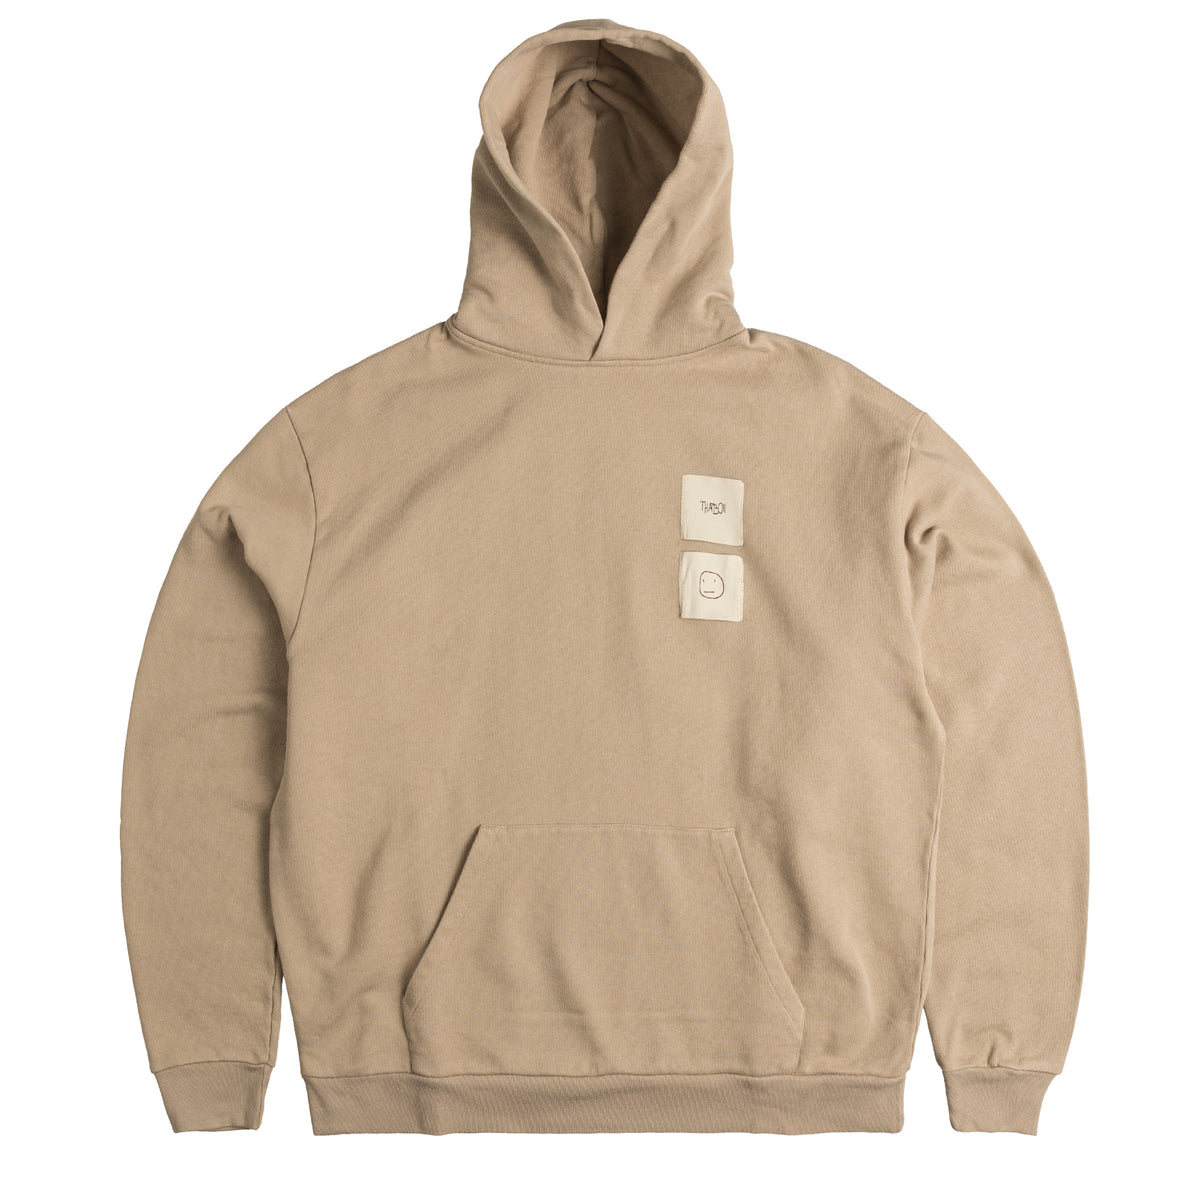 Thatboii Fvcked Up Hoodie – buy now at Asphaltgold Online Store!